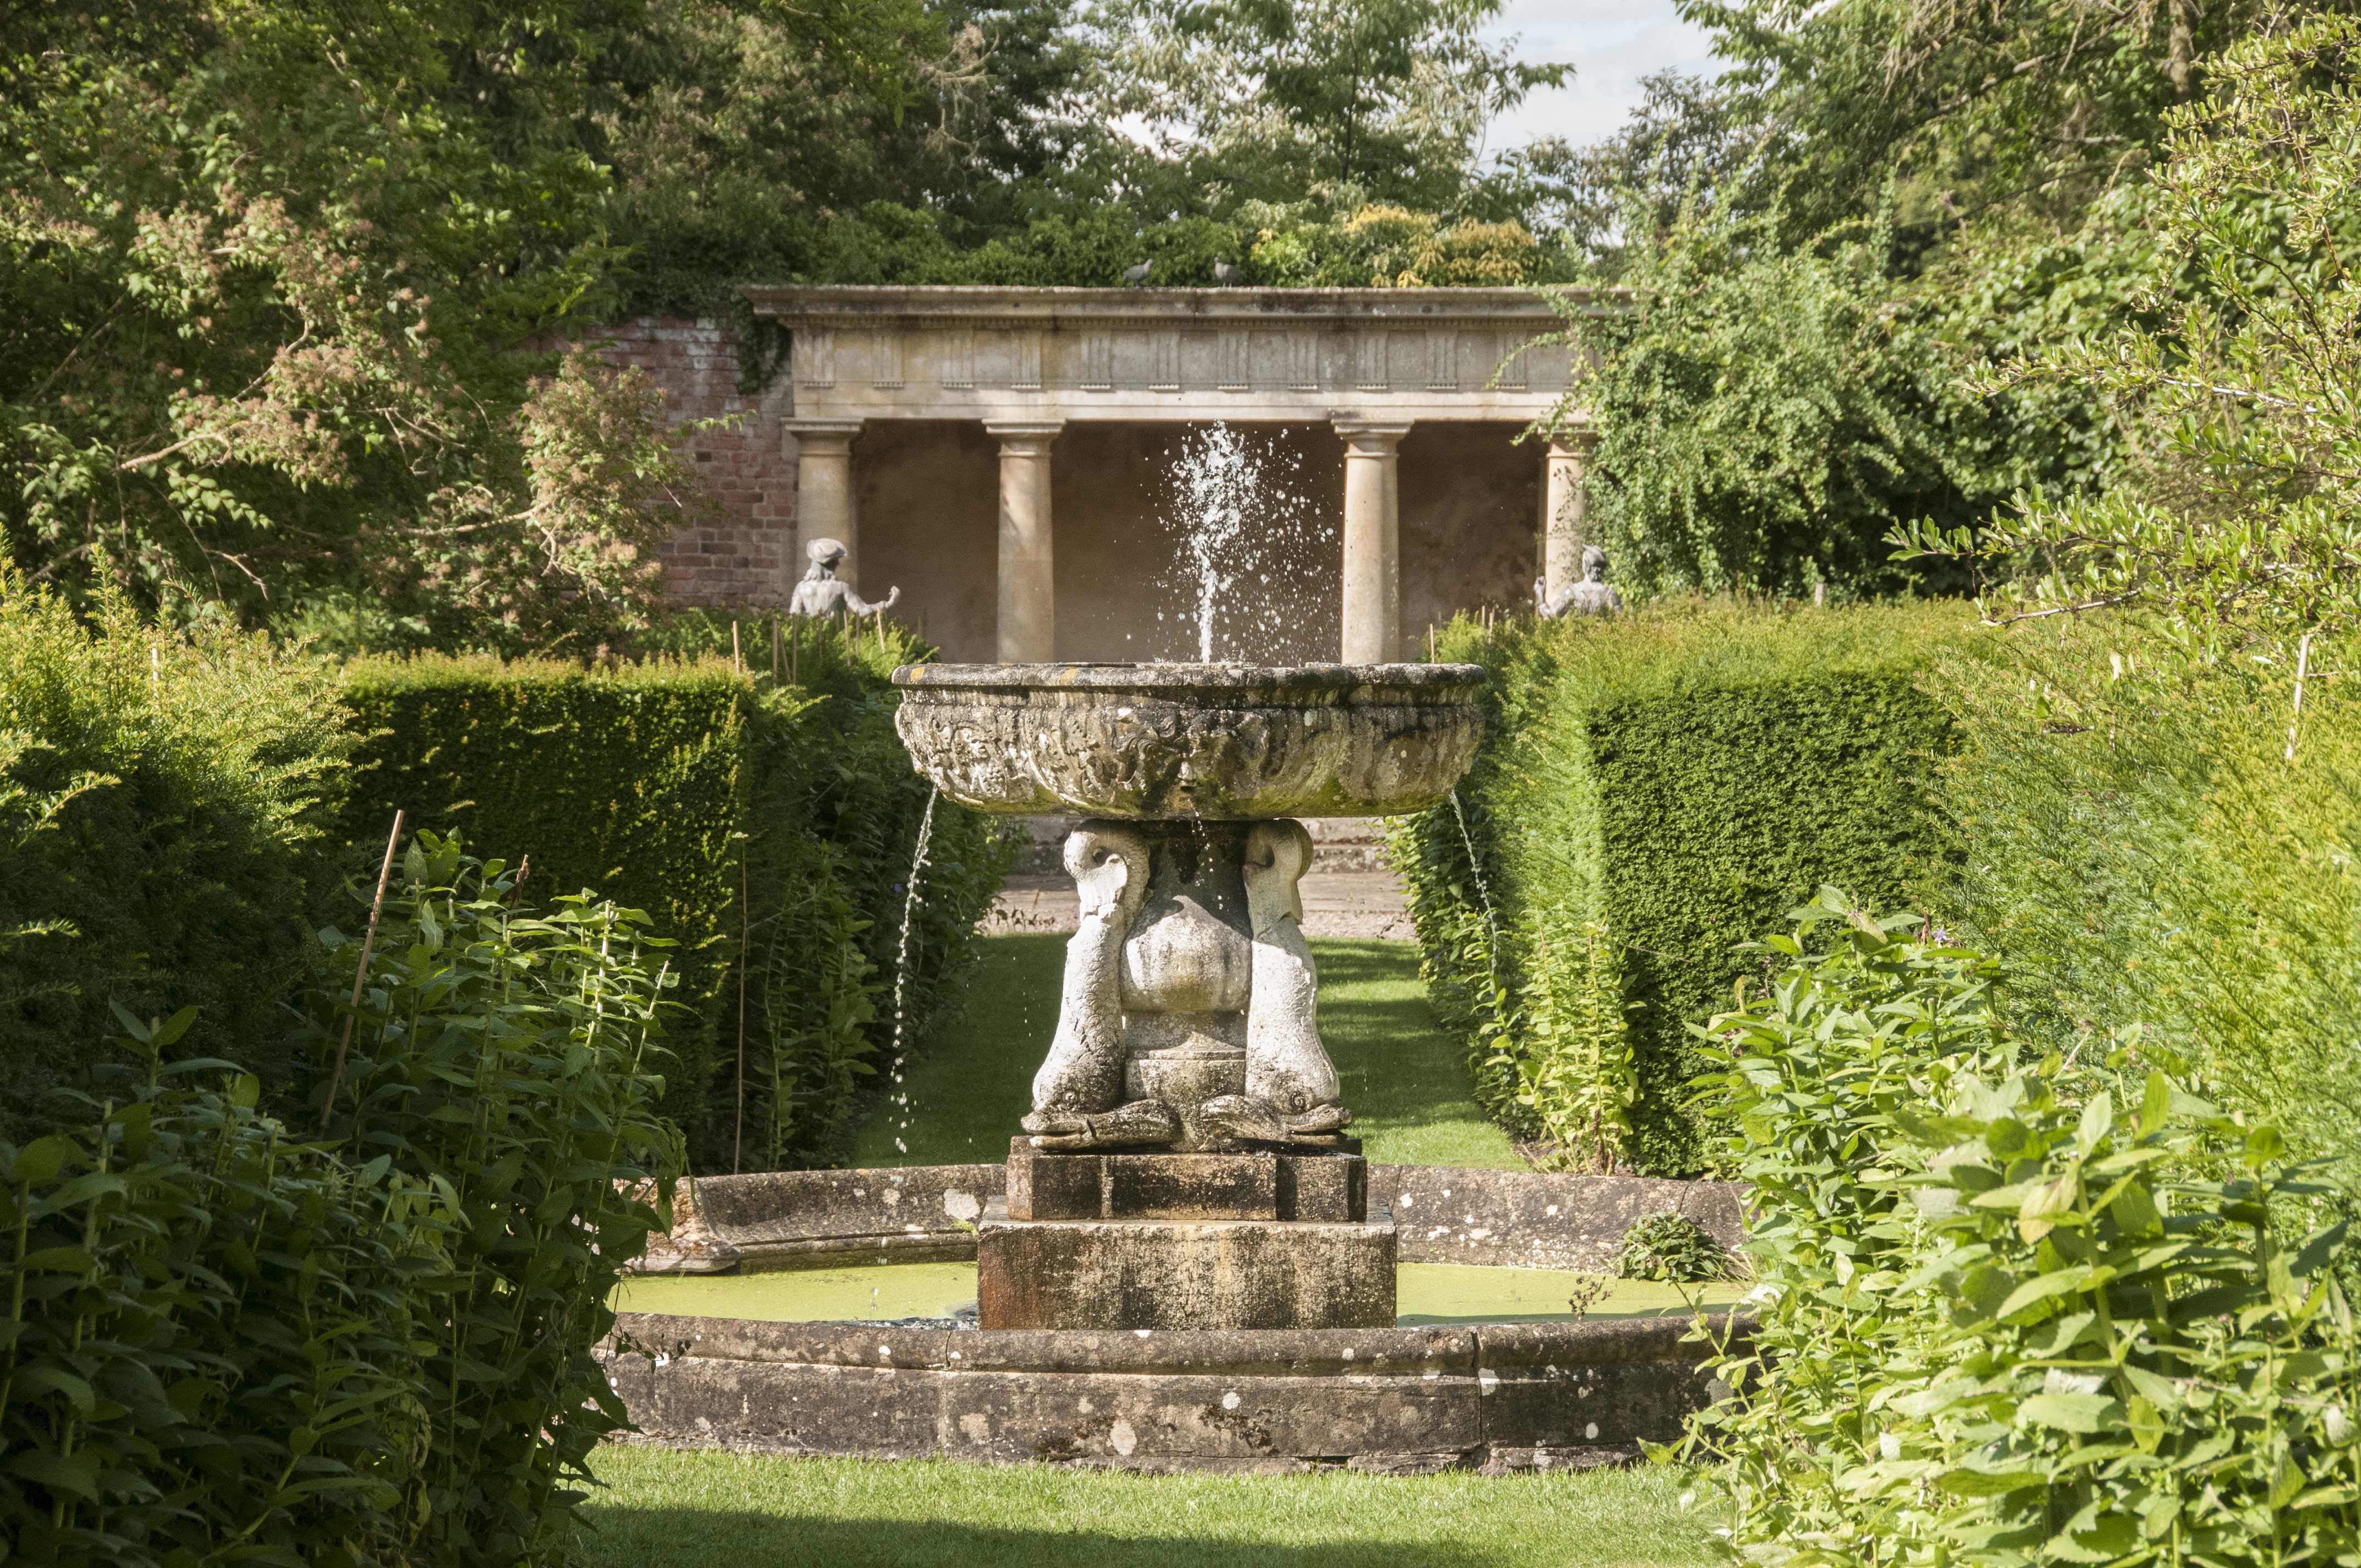 Spetchley Park Gardens, Worcestershire, England